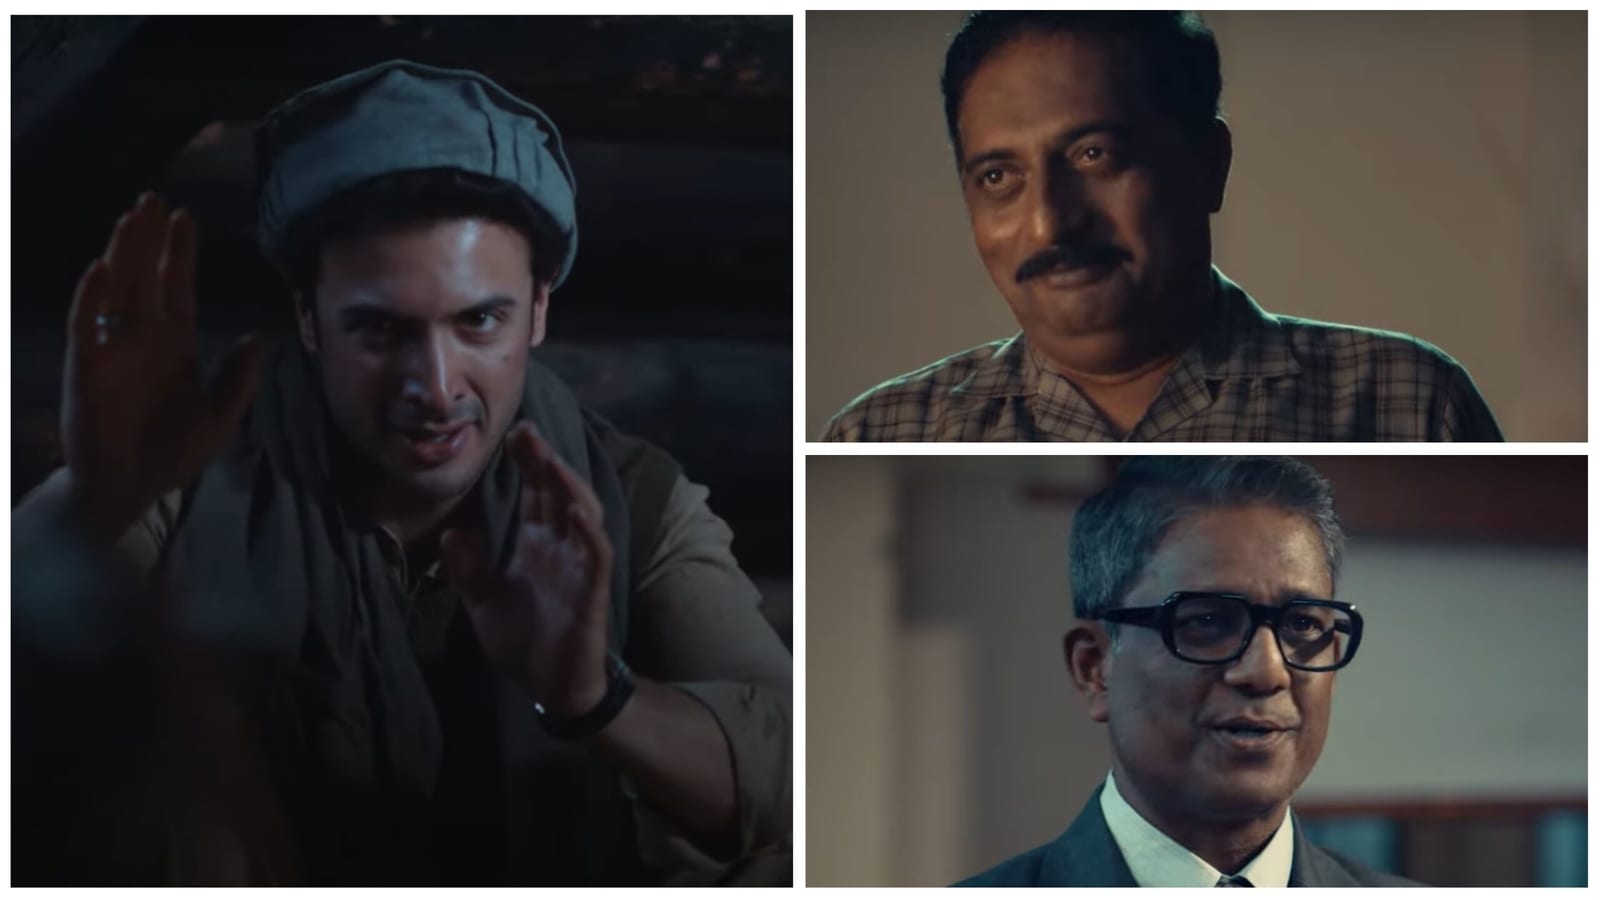 Mukhbir trailer: Prakash Raj, Adil Hussain star in this action-packed tale of unsung Indian spy with Raazi vibes. Watch